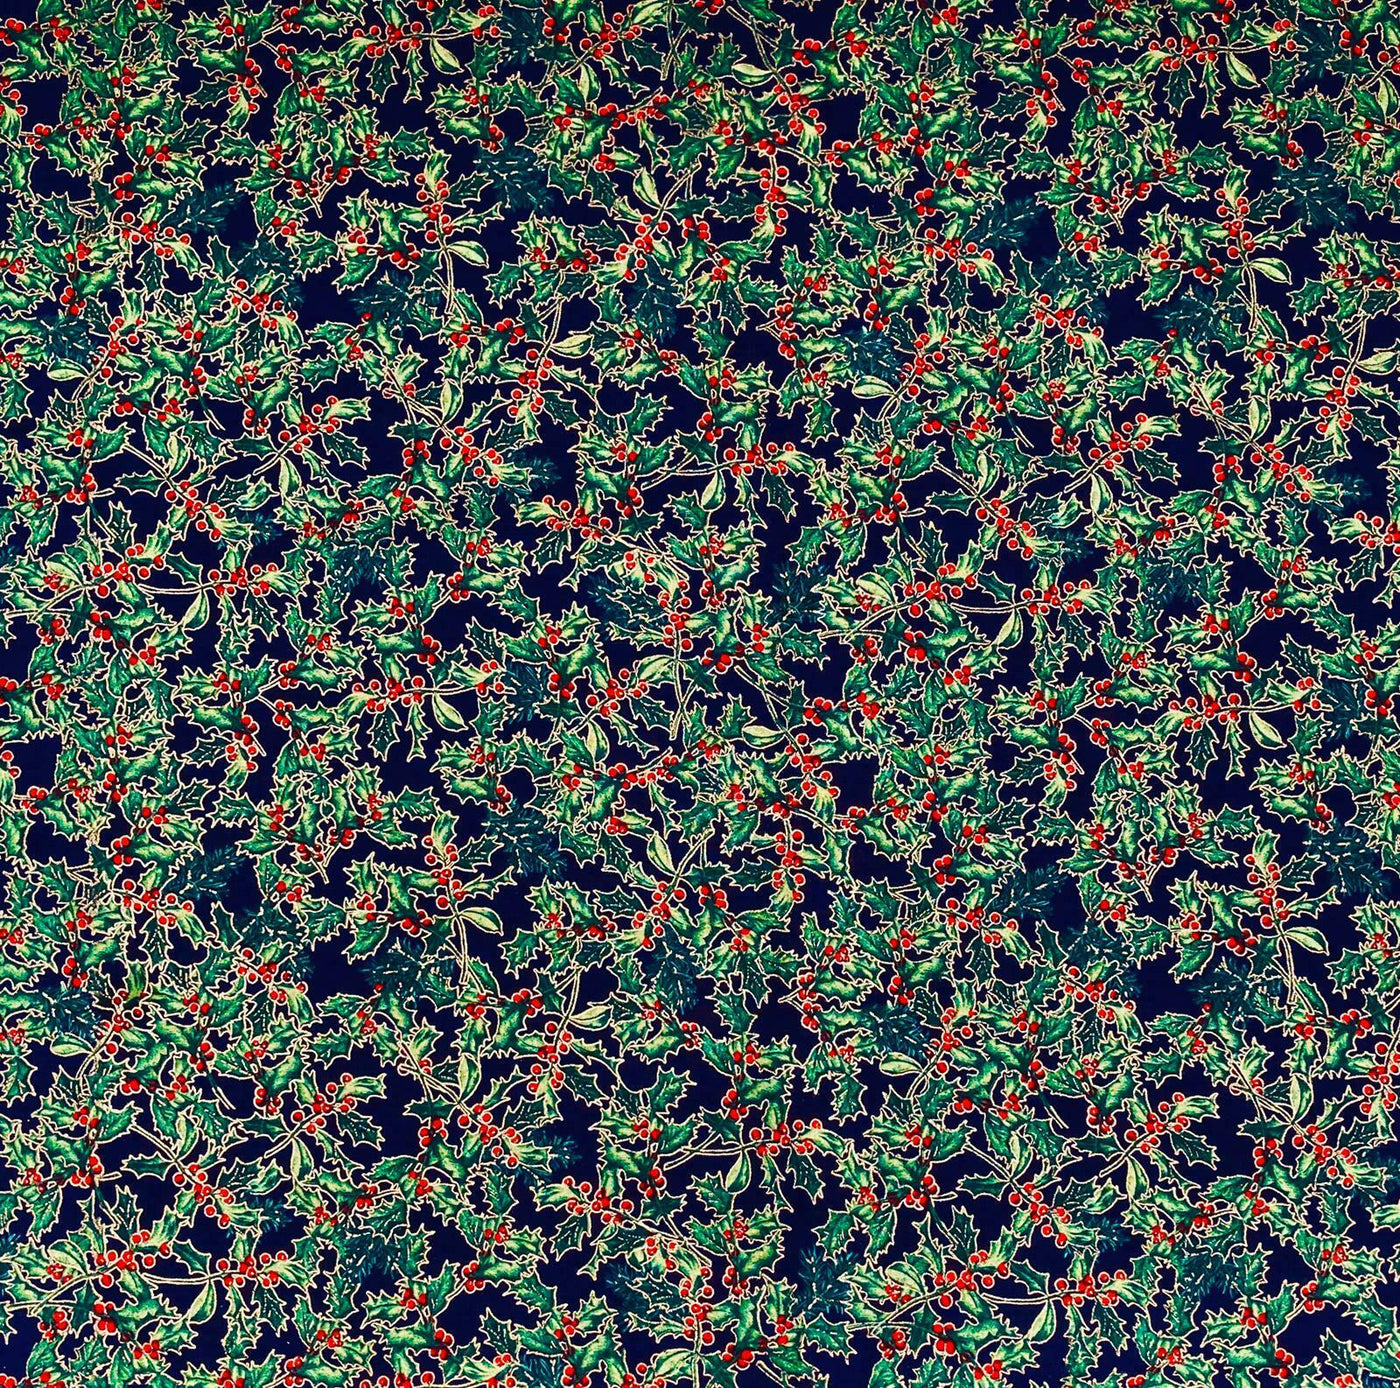 Xmas Christmas Holly 100% Cotton Fabric 54" wide metre/yard Ideal For masks